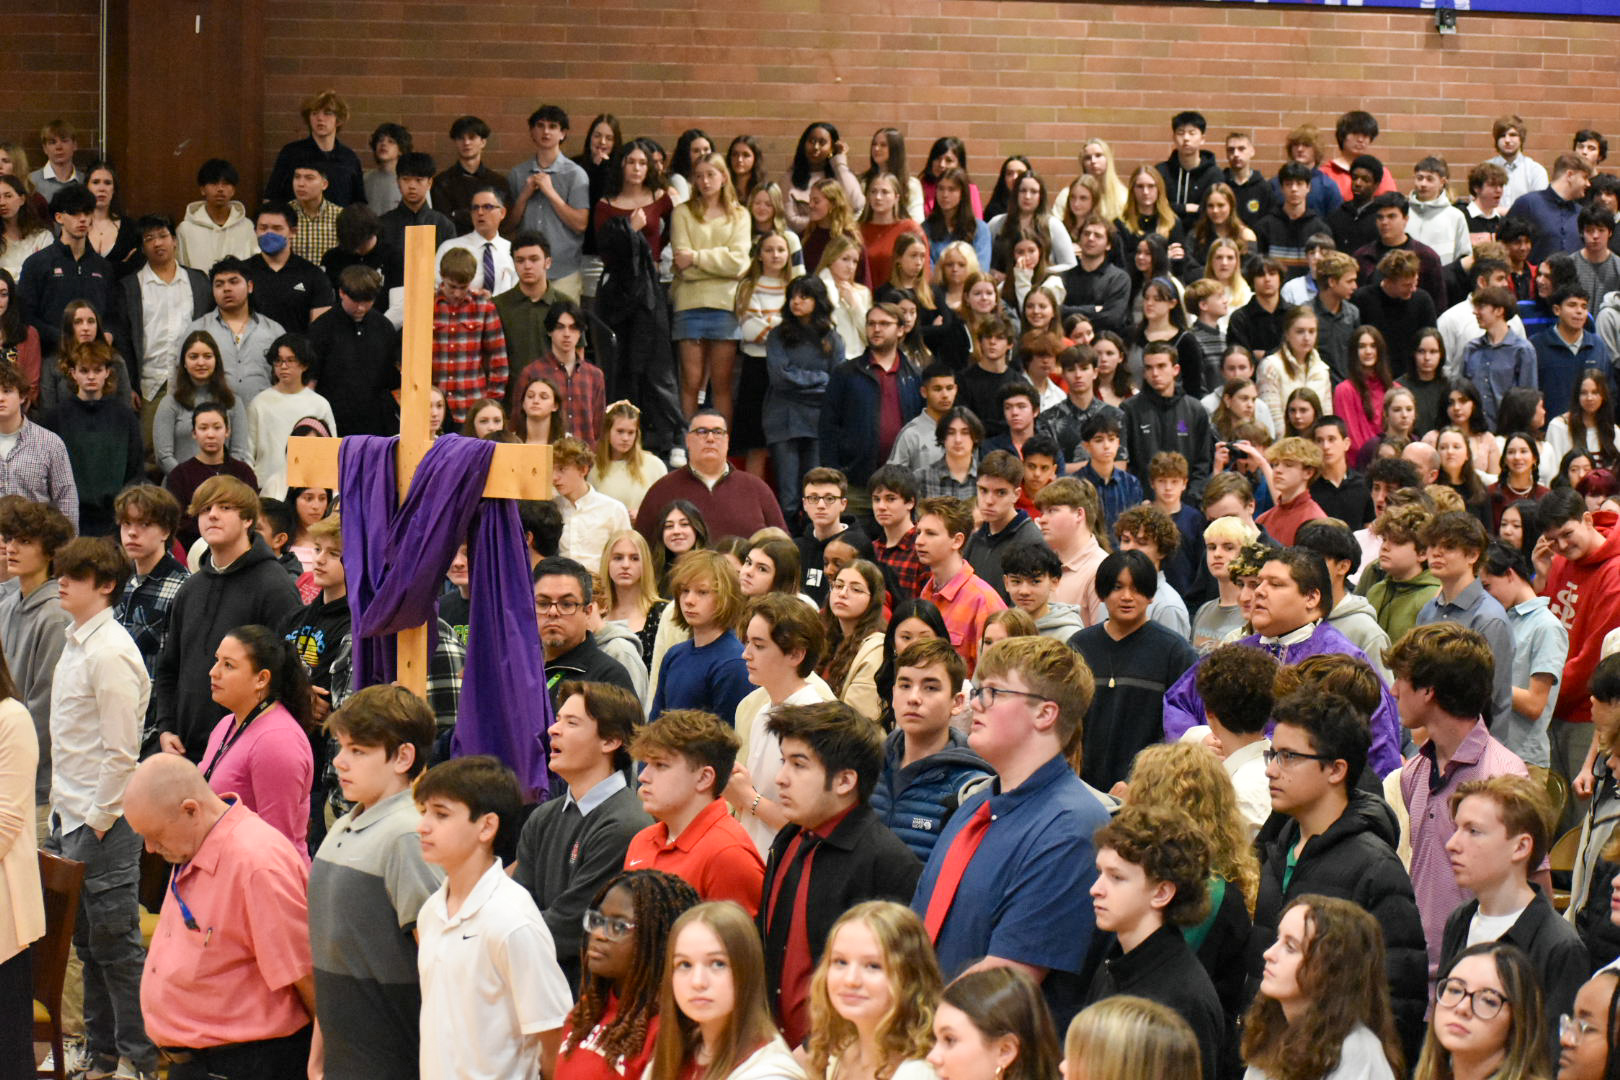 La+Salle+Marks+the+Beginning+of+Lent+With+Ash+Wednesday+Mass